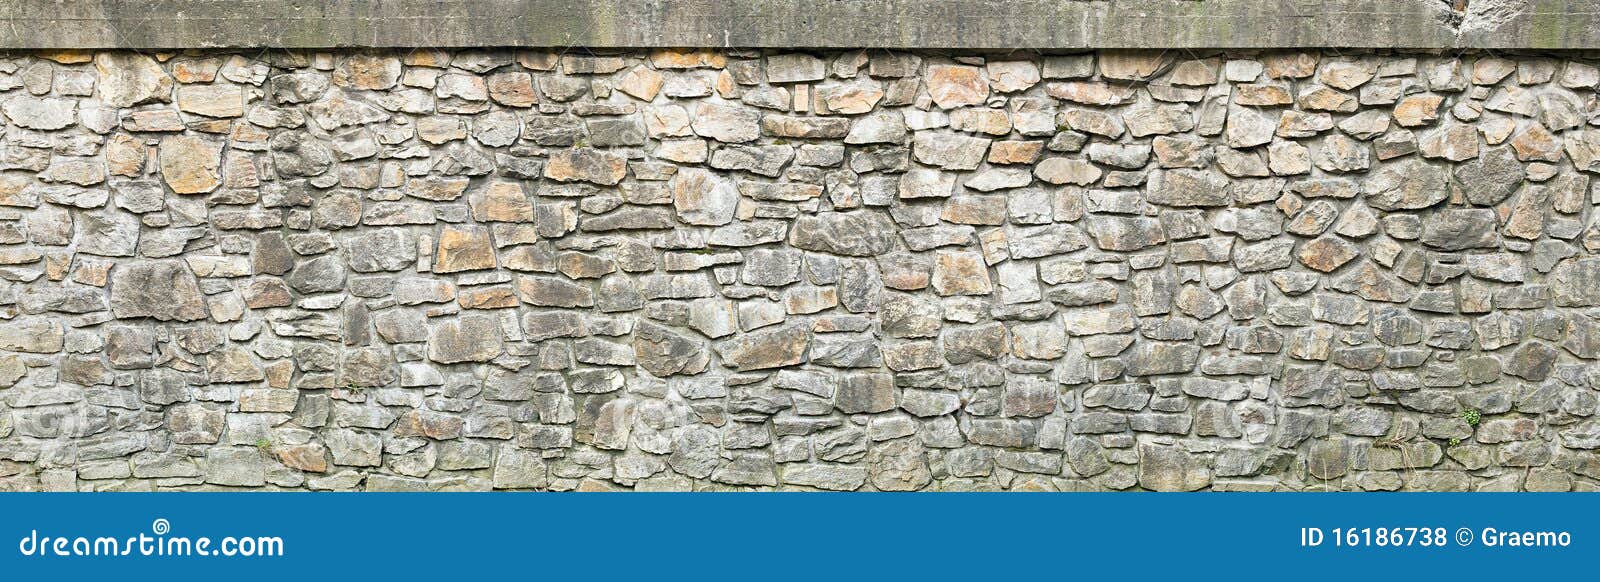 weathered stone wall texture